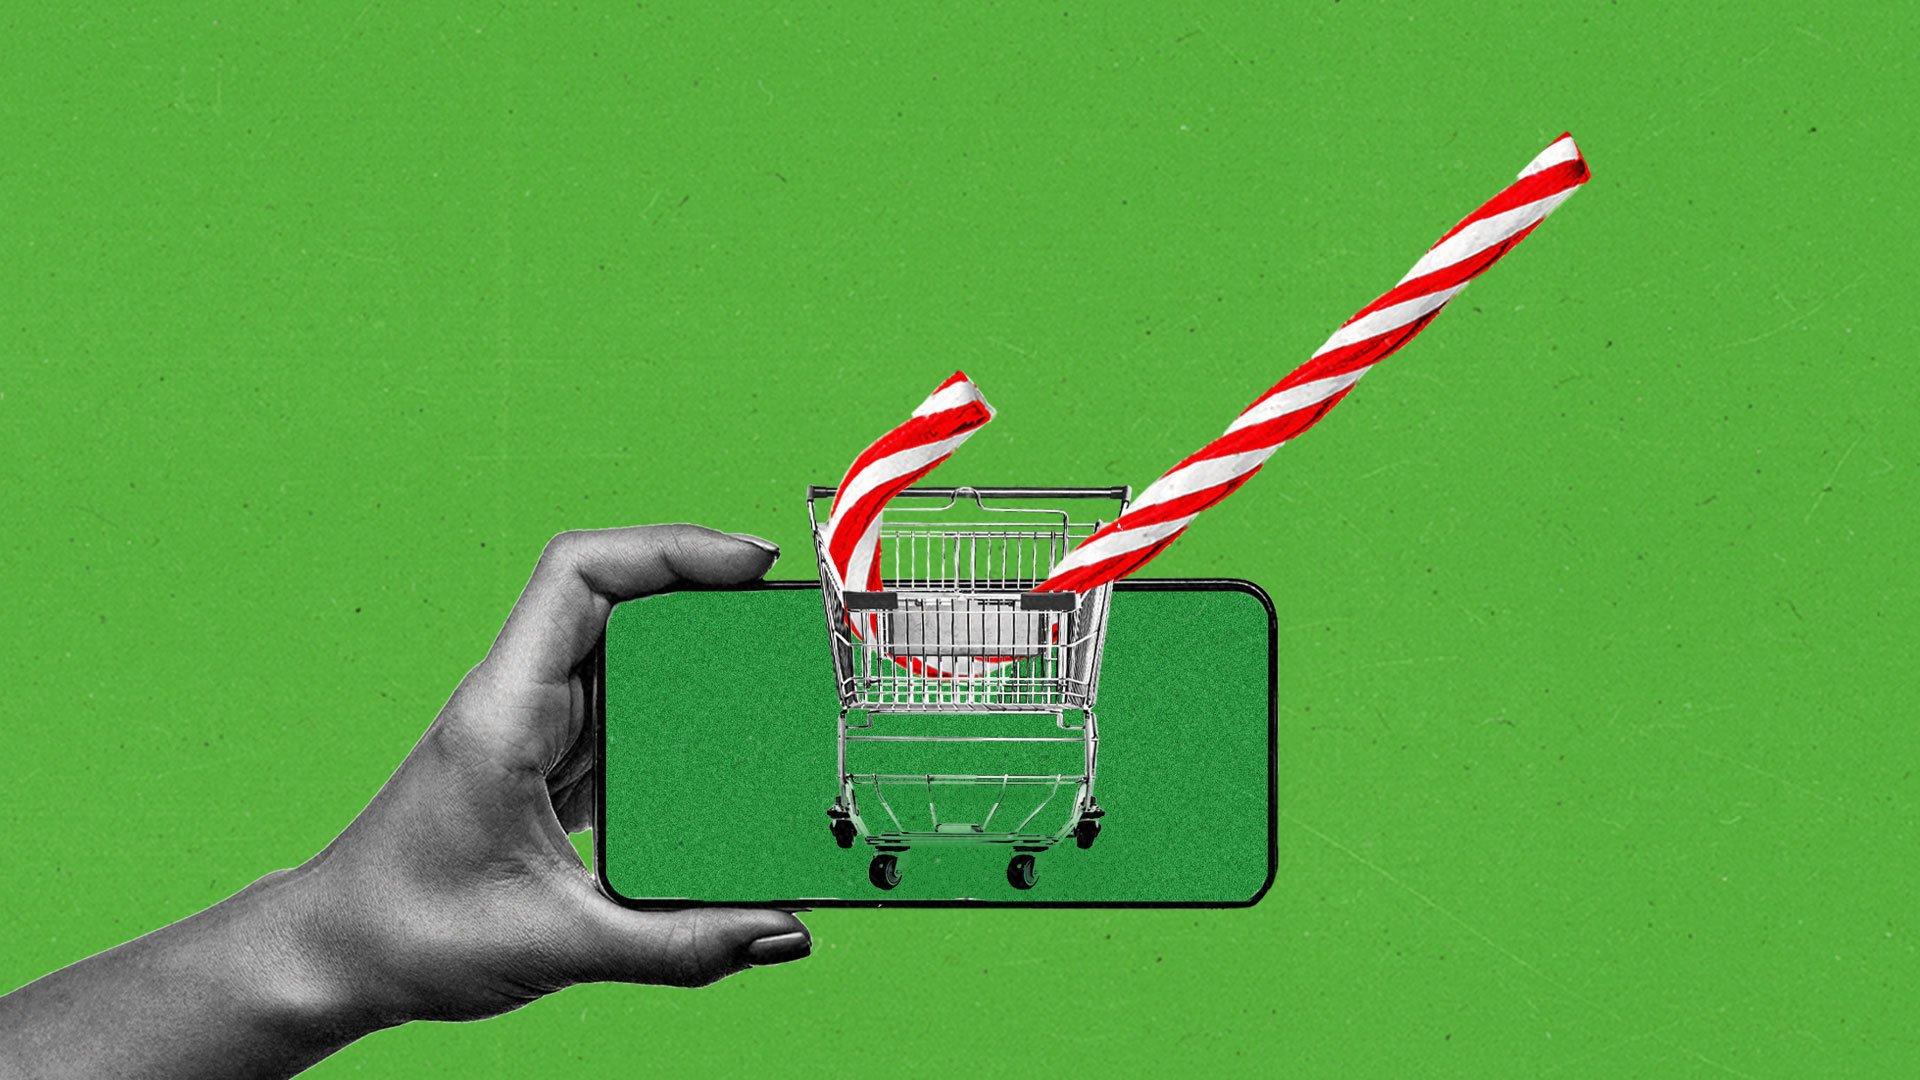 A hand holds a smartphone with the image of a shopping cart containing an oversized candy cane.